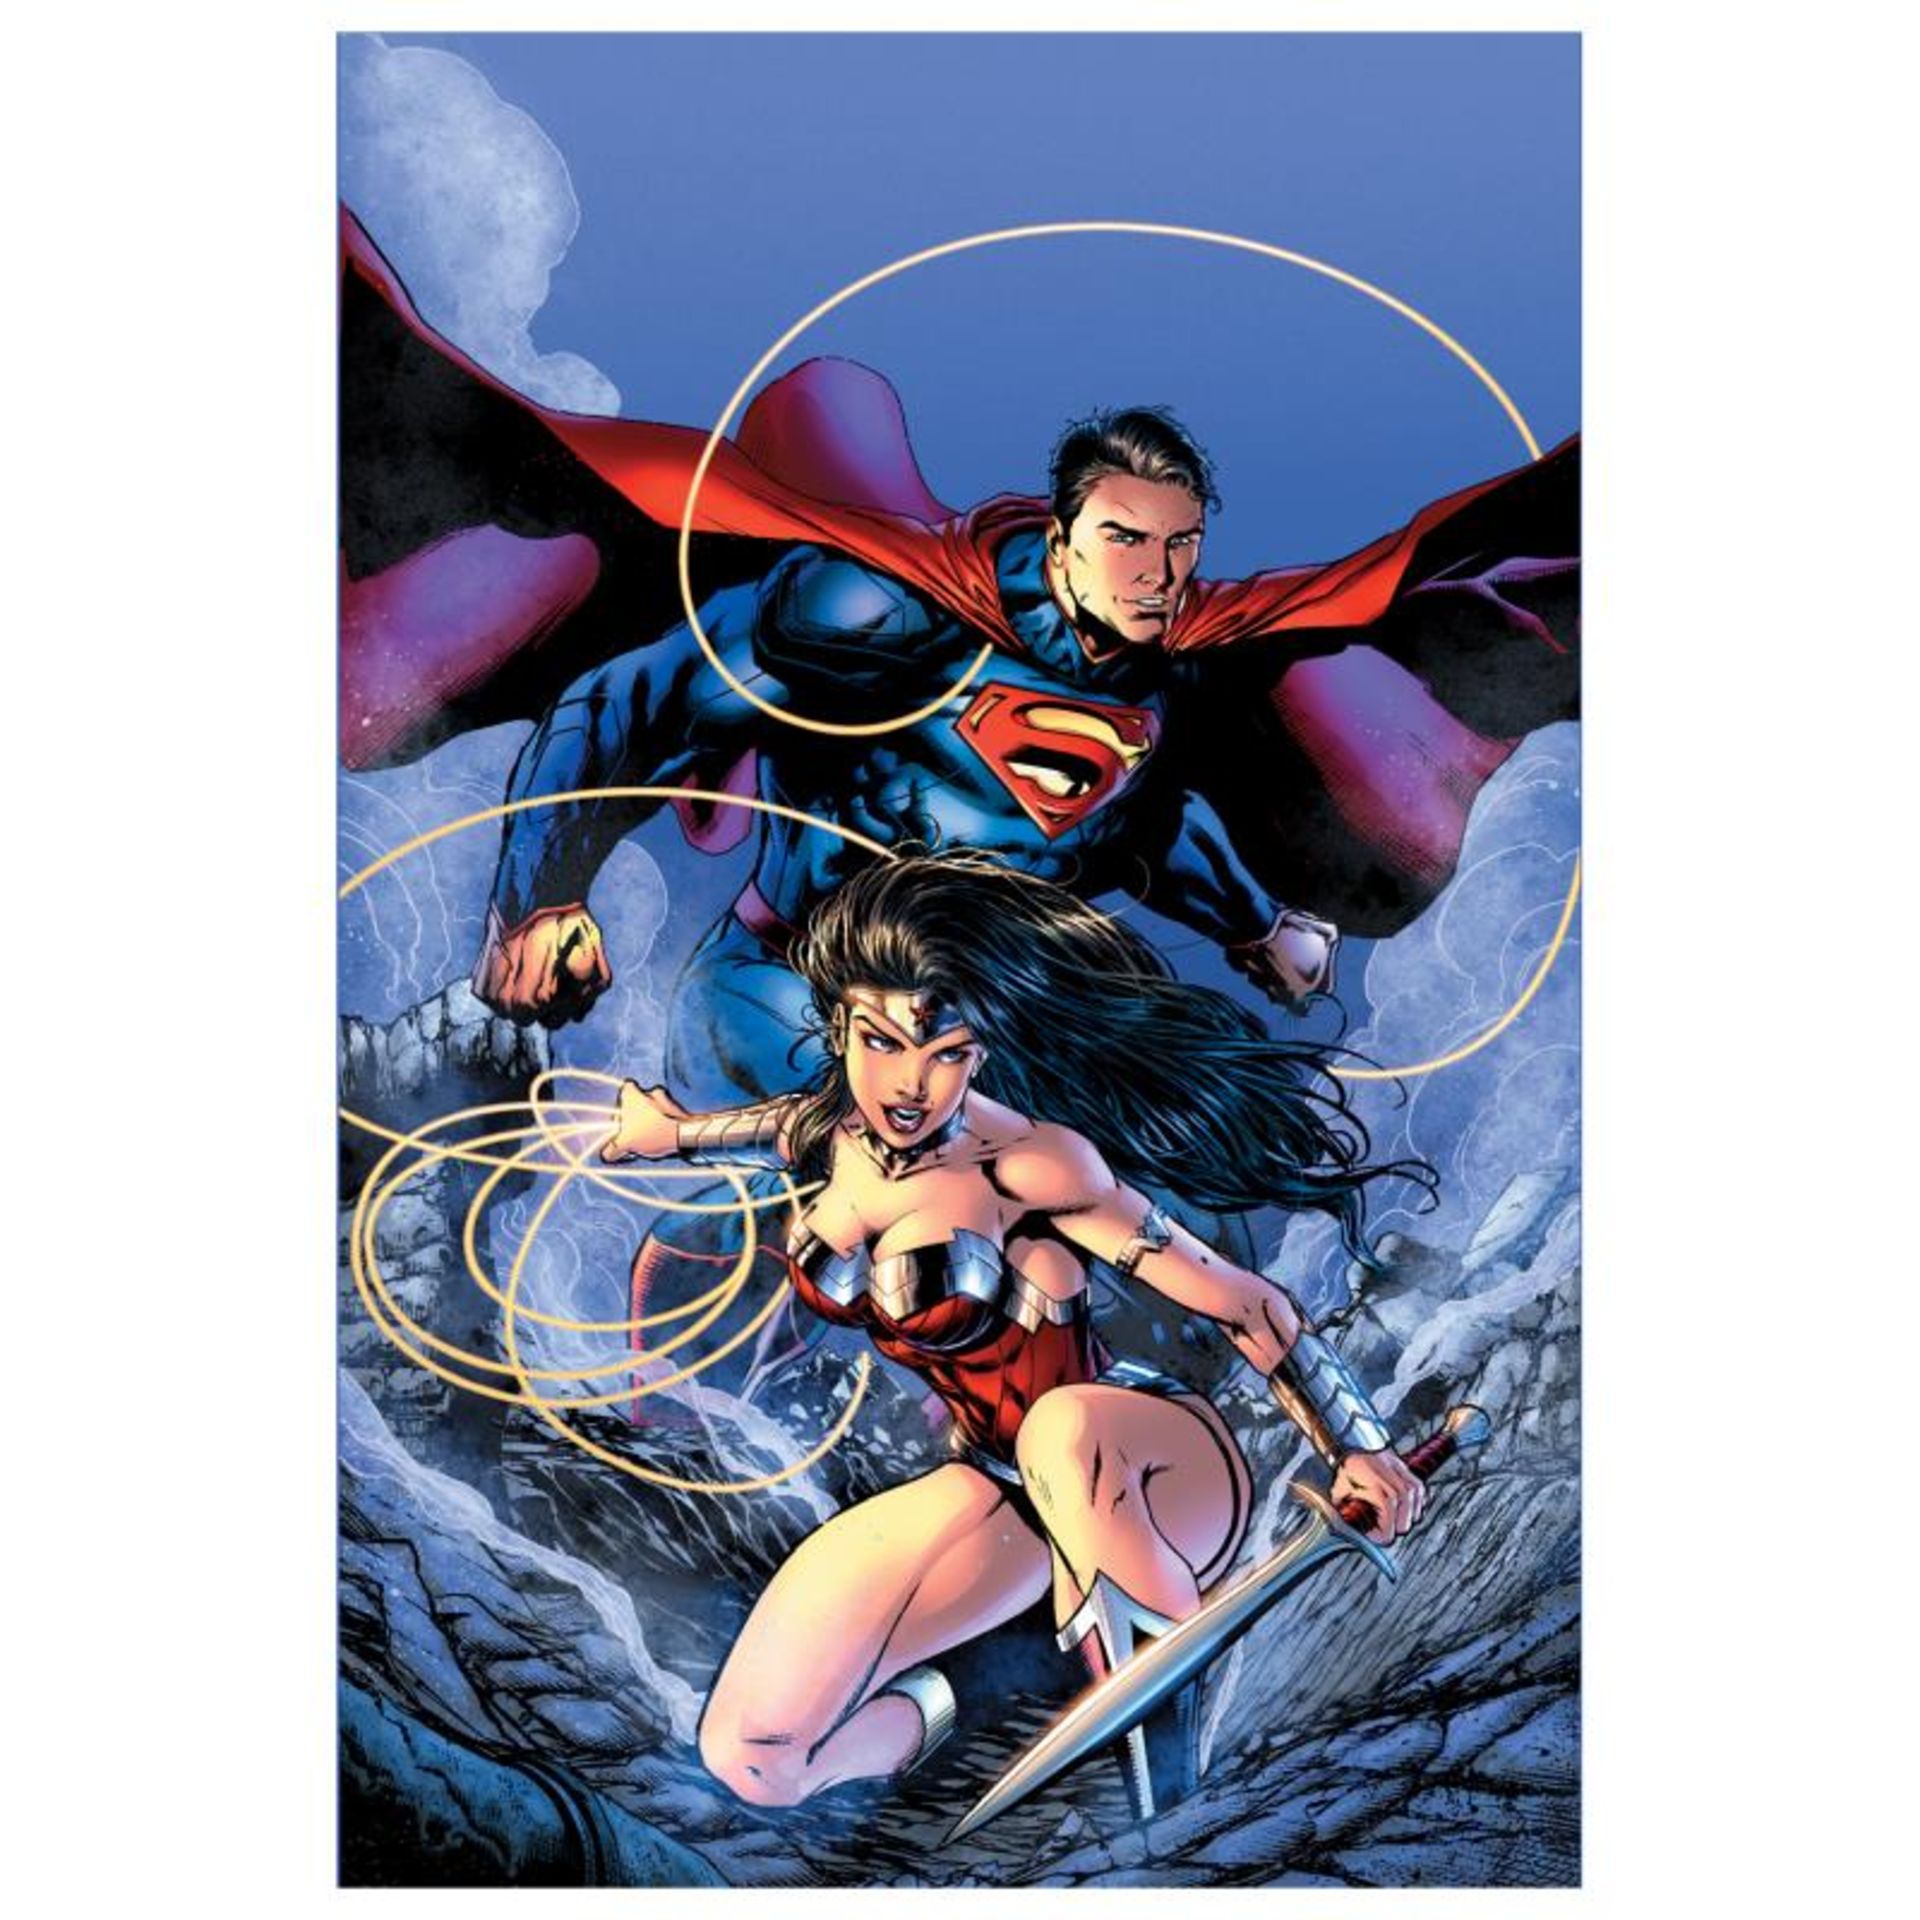 DC Comics, "Justice League (The New 52) #14" Numbered Limited Edition Giclee on - Image 2 of 8